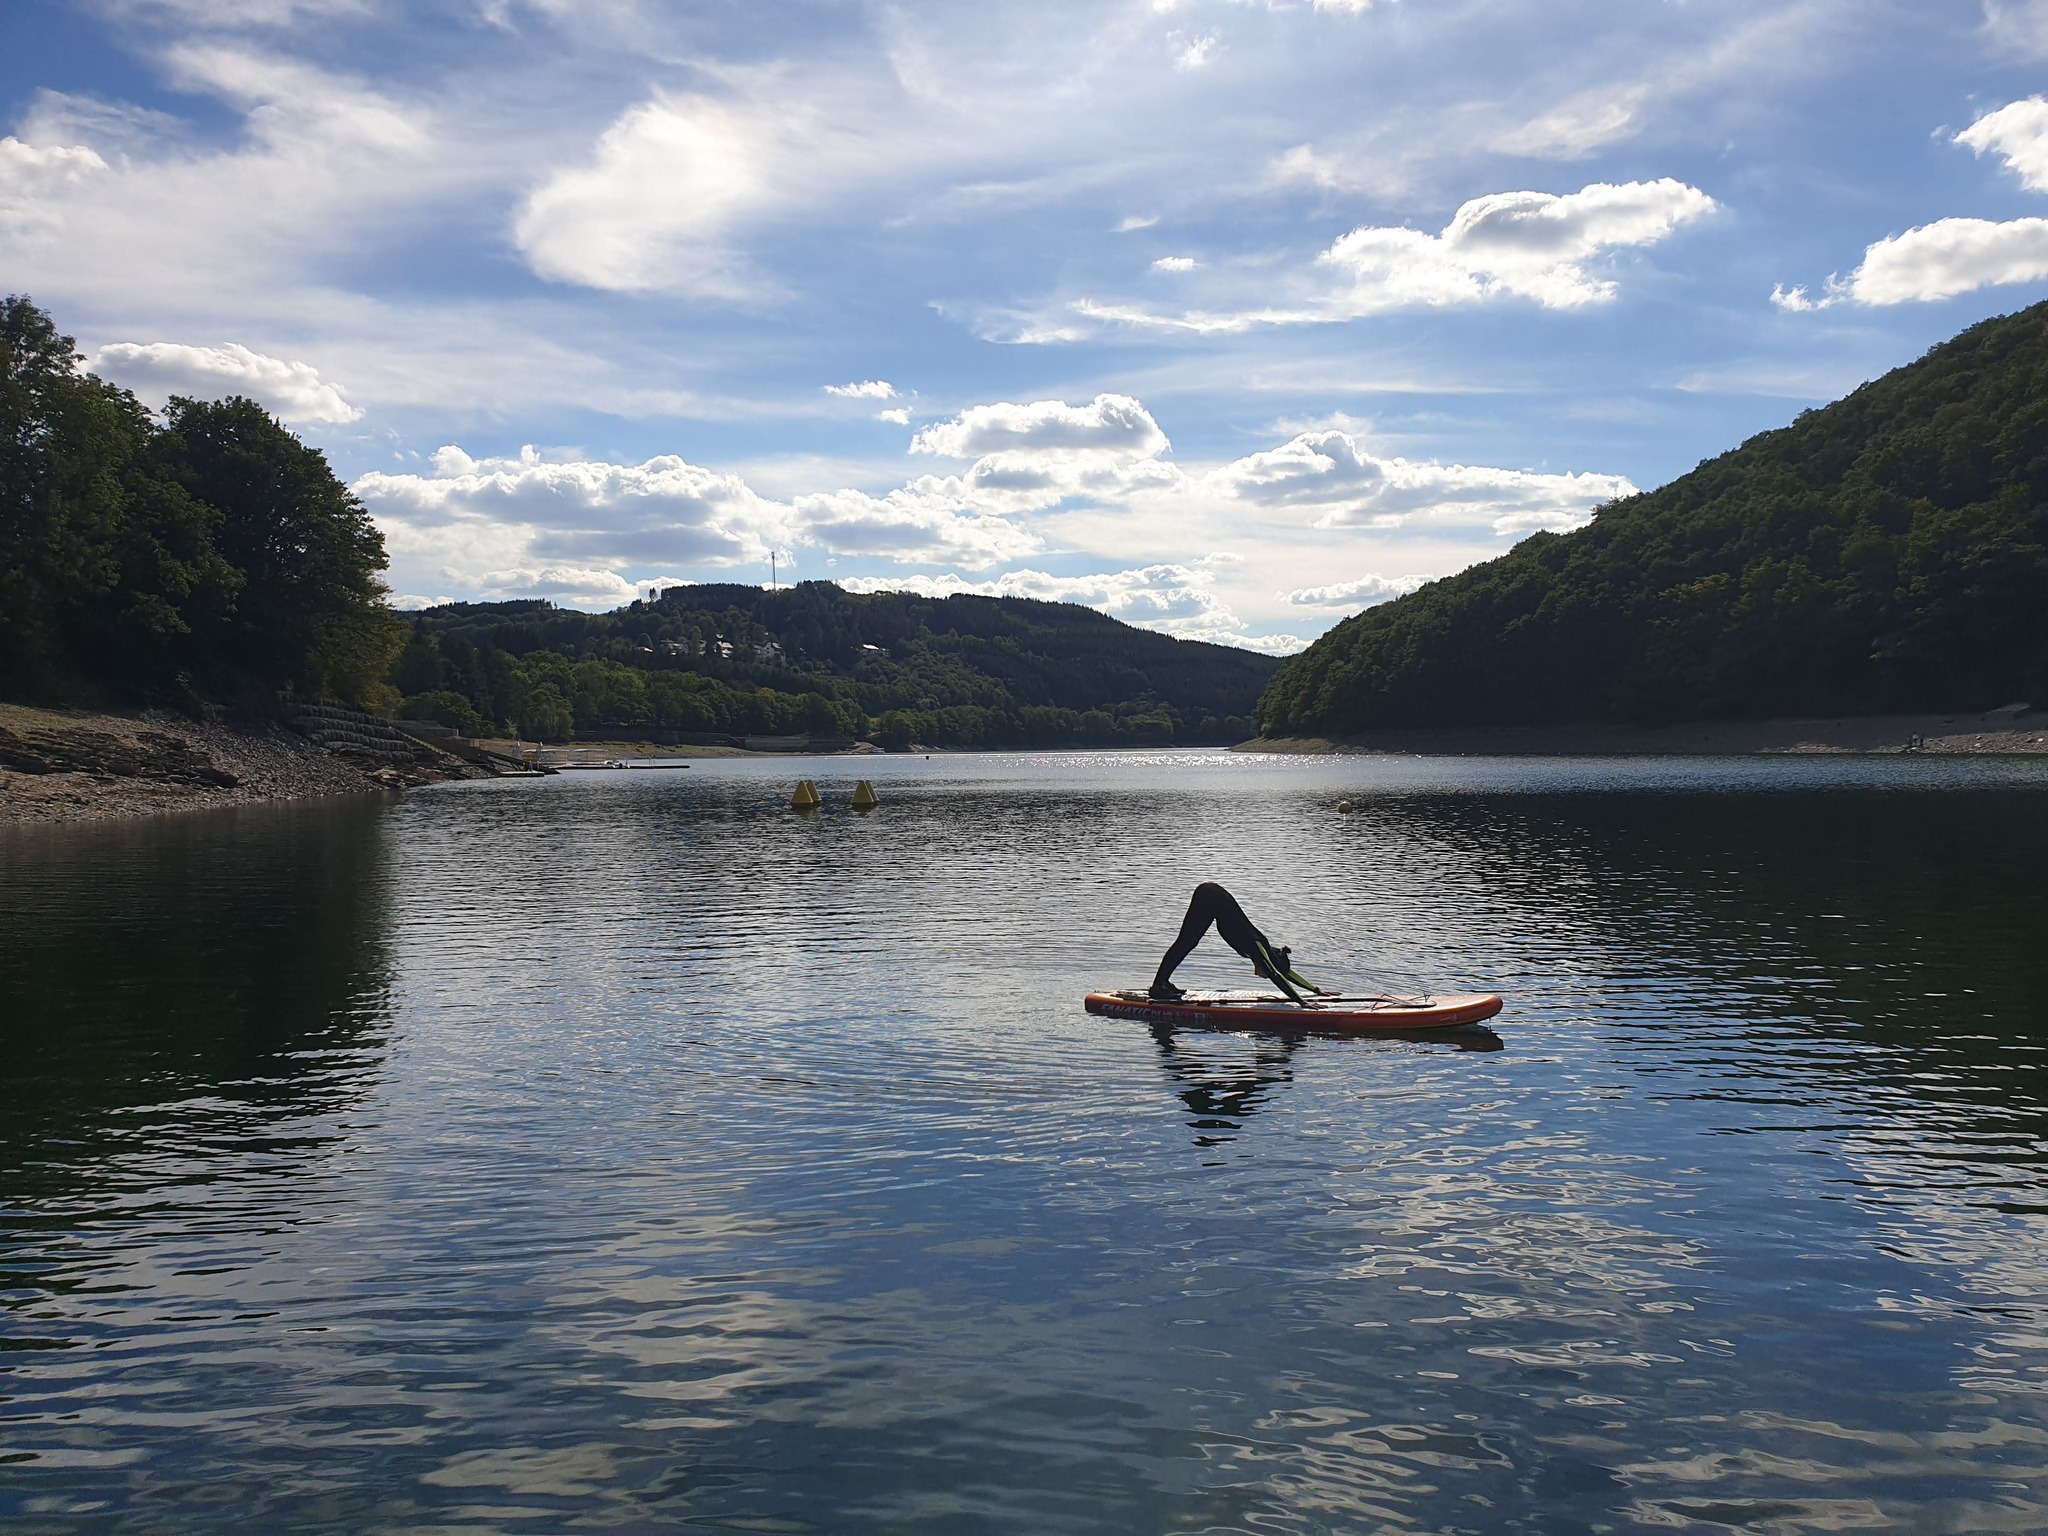 Yoga SUP after work courses on the Upper Sûre lake